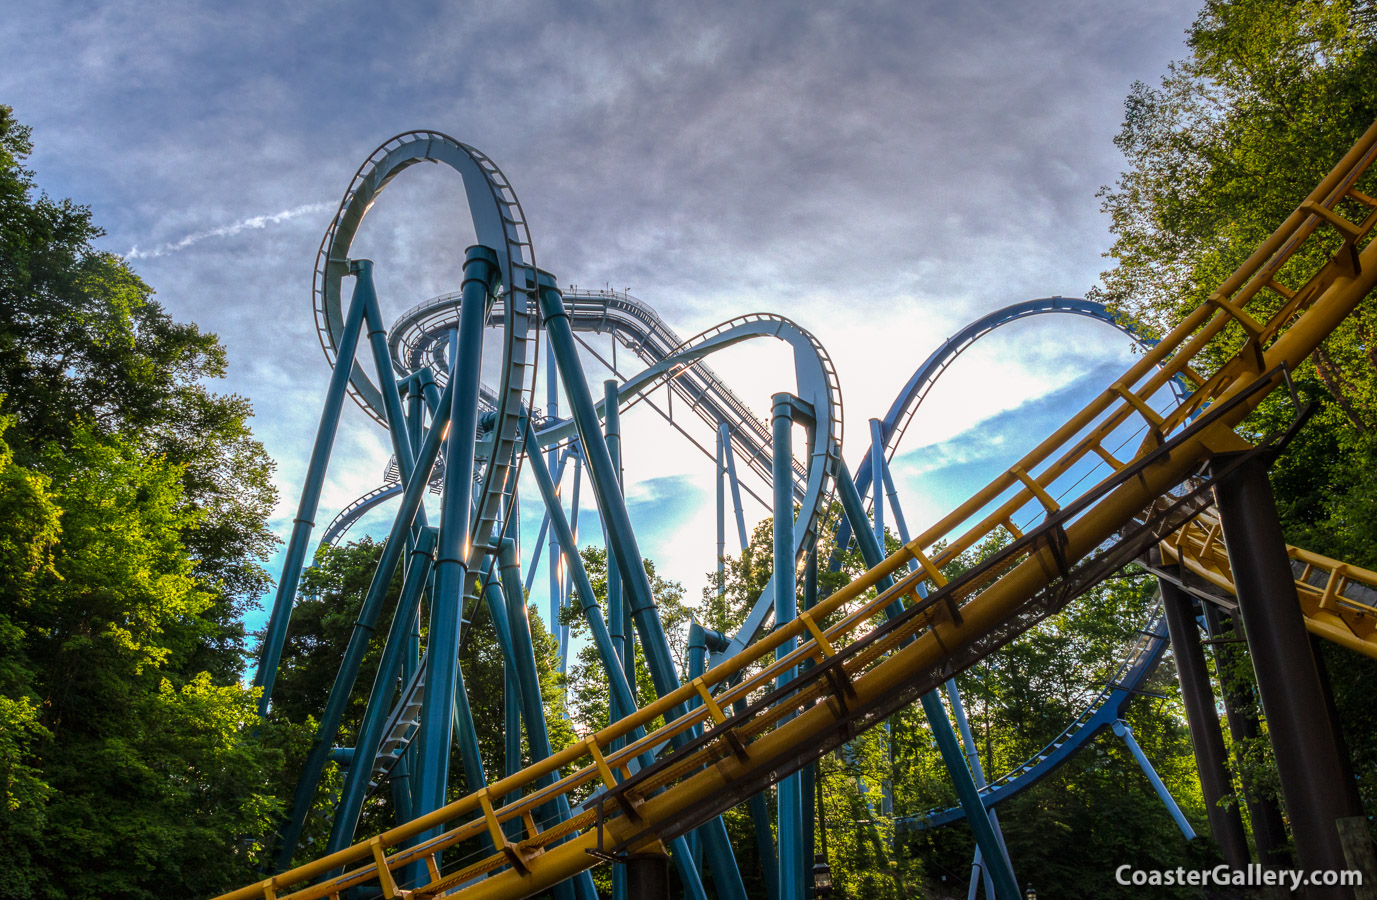 This shot shows a looping coaster, a record-setting inverted coaster, and the world's first floorless Dive Coaster.